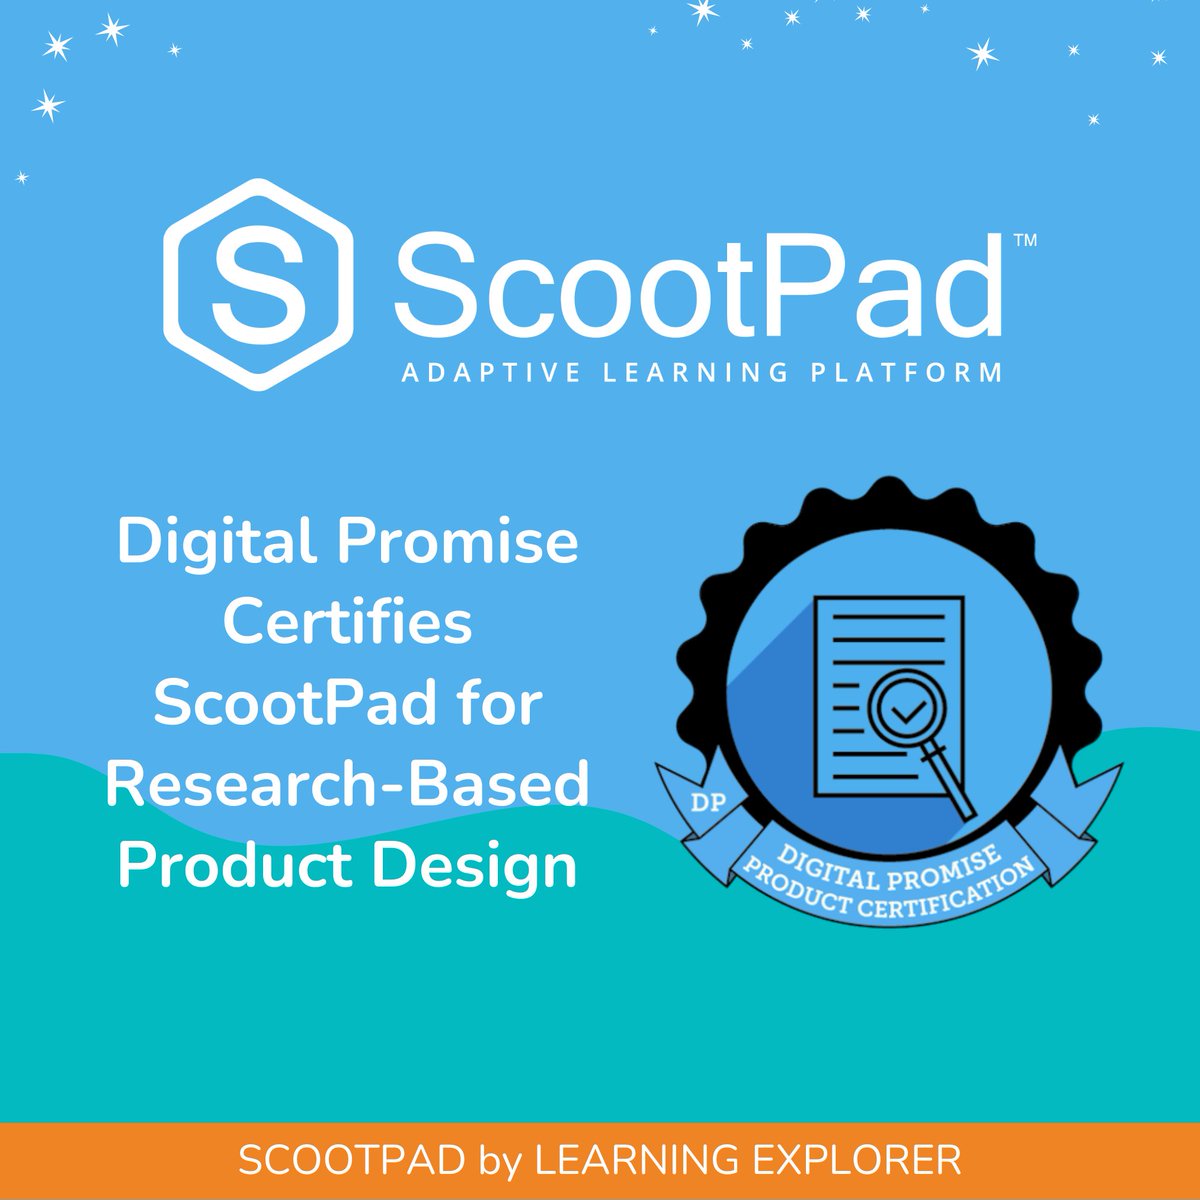 ScootPad has earned @DigitalPromise's Research-Based Design product certification! Education leaders can feel confident in selecting ScootPad because Digital Promise has verified that our solution was designed by leveraging research about learning. ow.ly/IWL150QxrVE #edtech